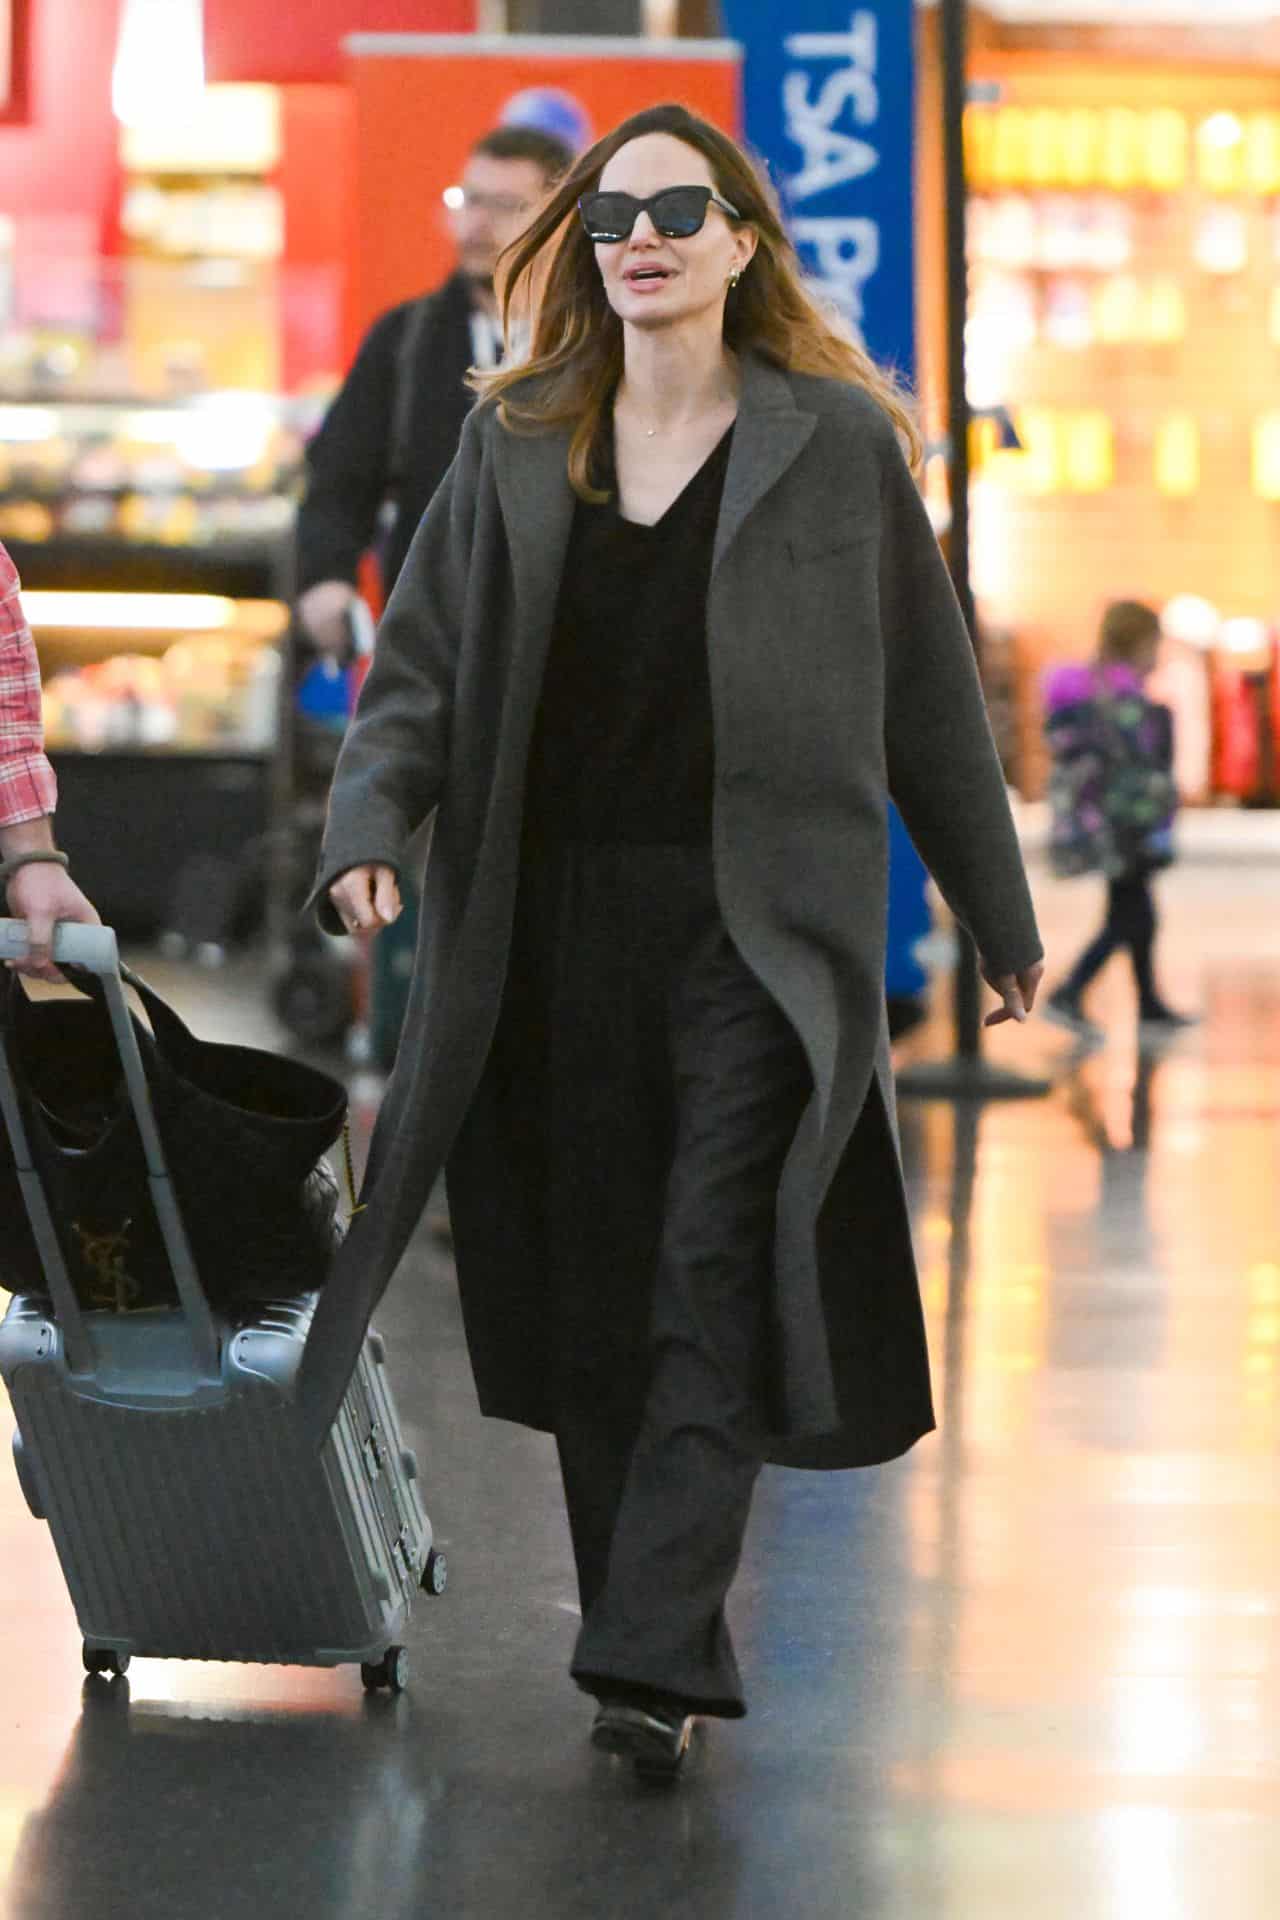 Angelina Jolie Nails the Chic Travel Look in Grey Wool Coat